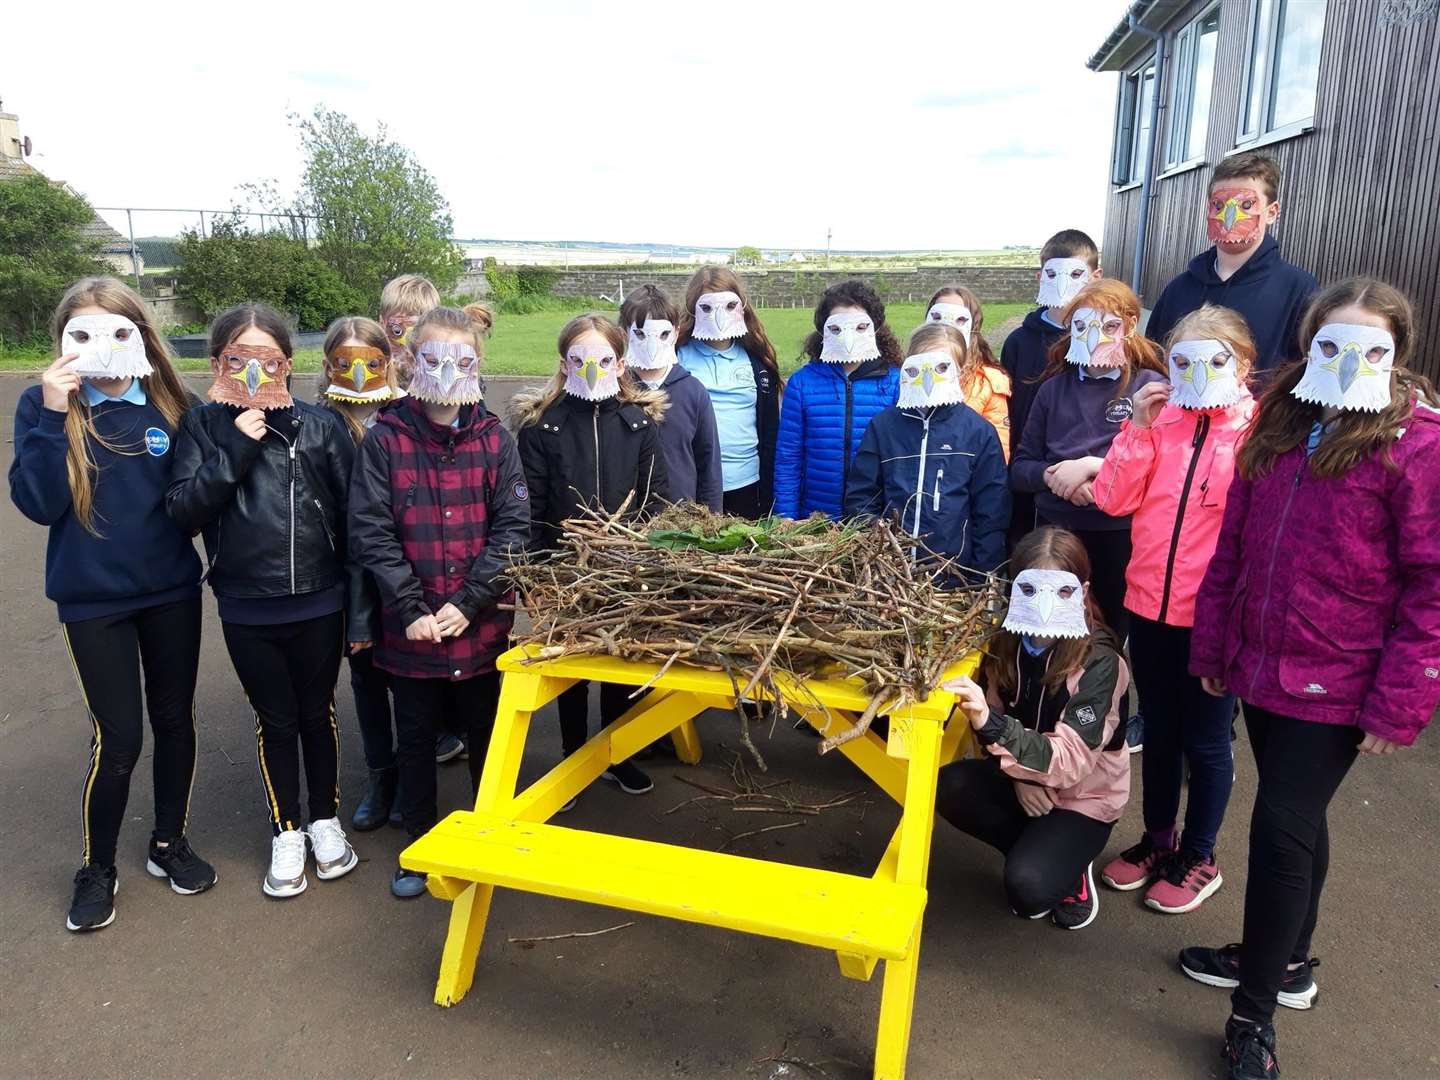 Bower P5-7 class sporting their eagle masks and showing off their life-sized golden eagle's nest.